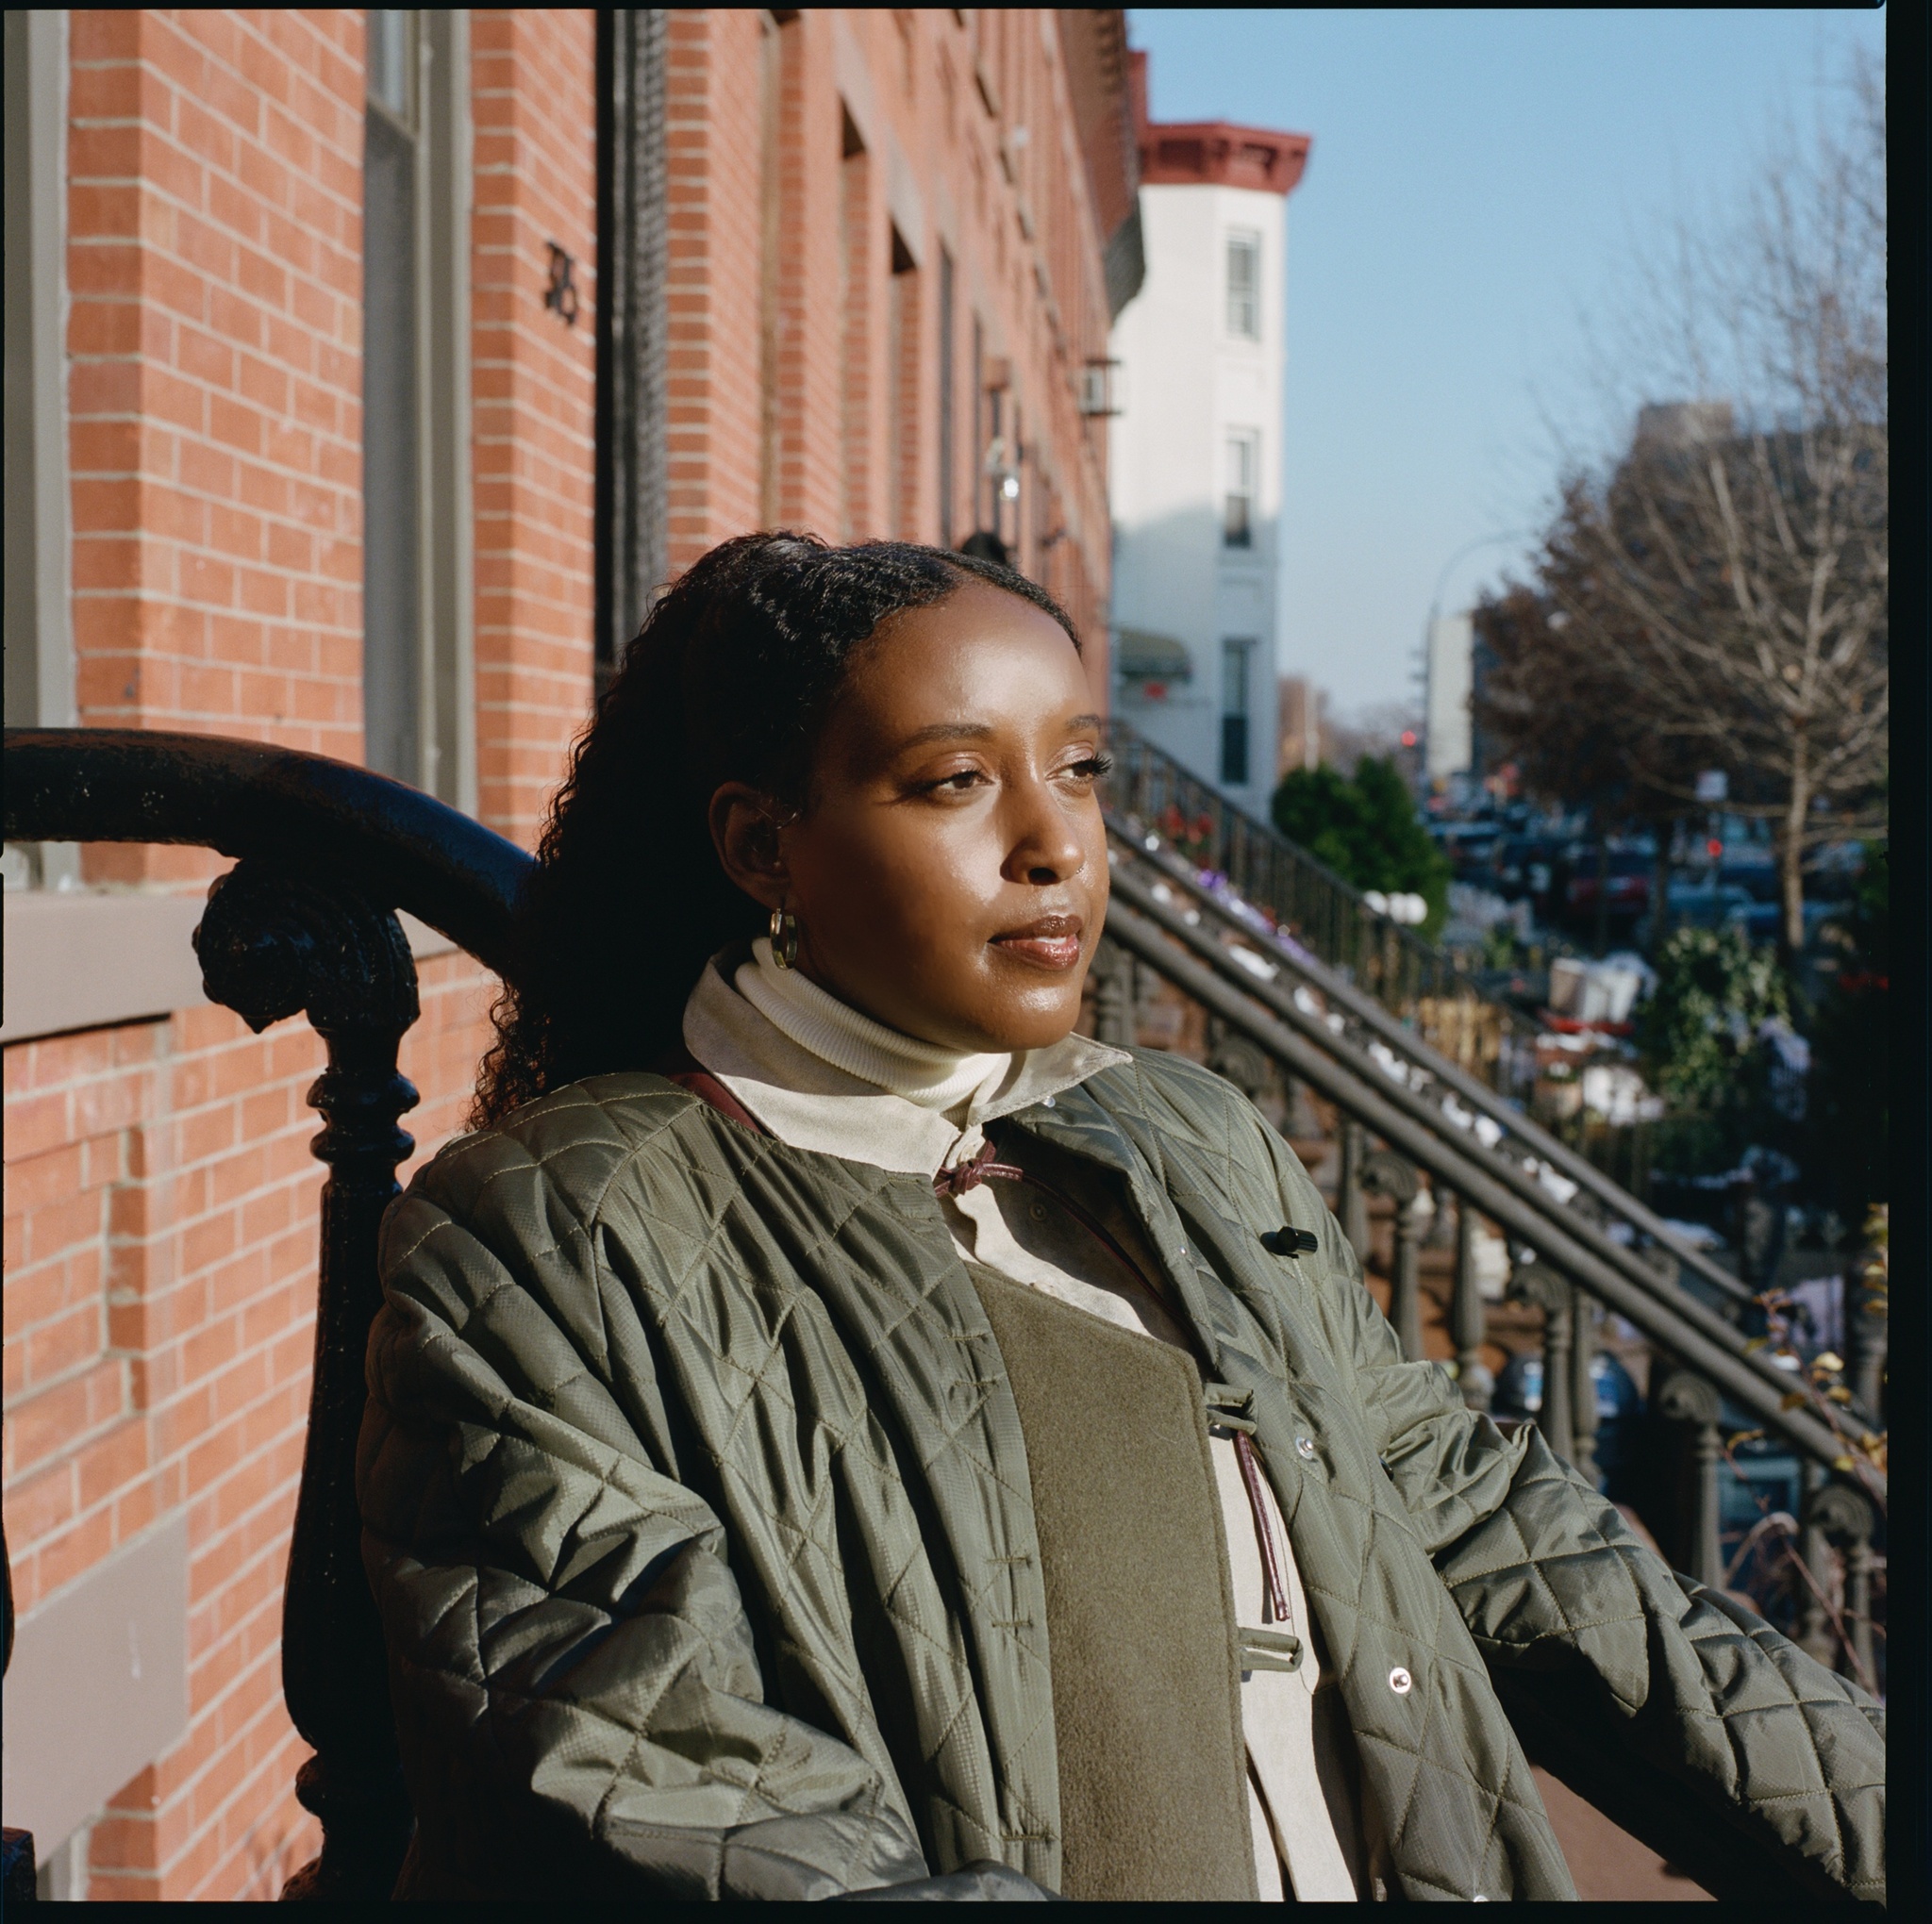 The artist Salome Asega in a green jacket looking out from a stoop against a line of red brick townhouses